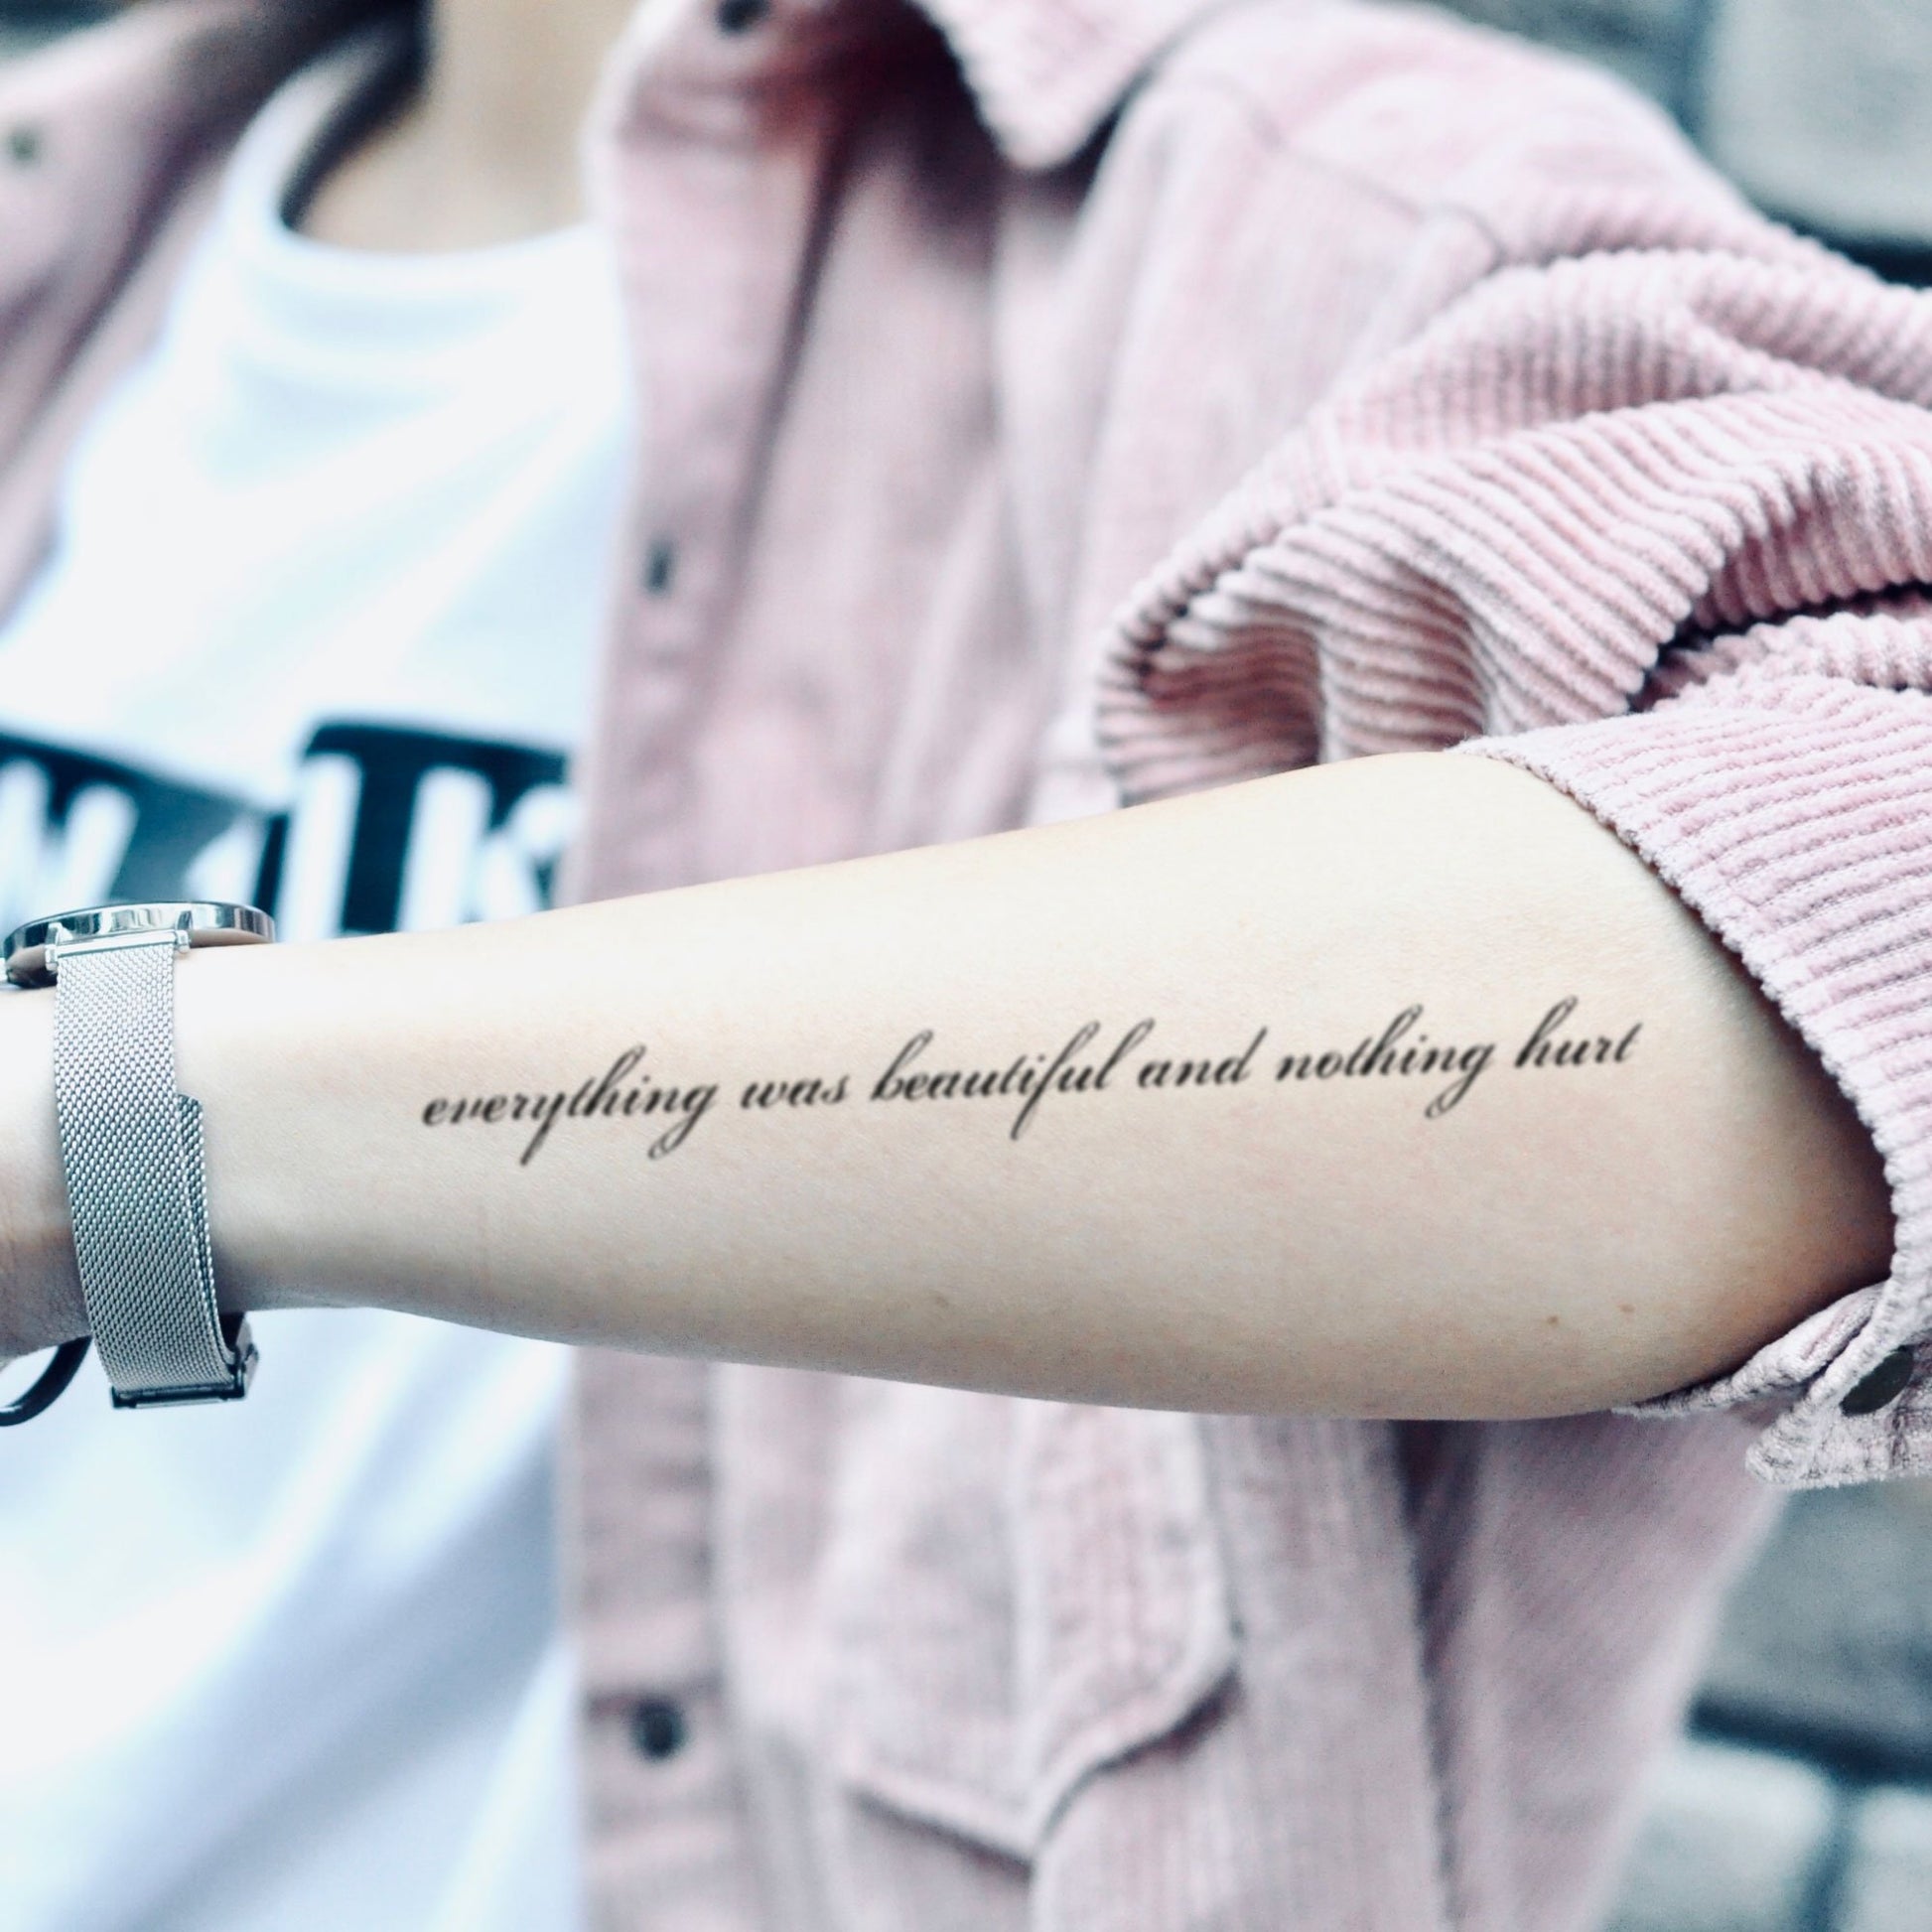 fake medium everything was beautiful and nothing hurt lettering temporary tattoo sticker design idea on forearm